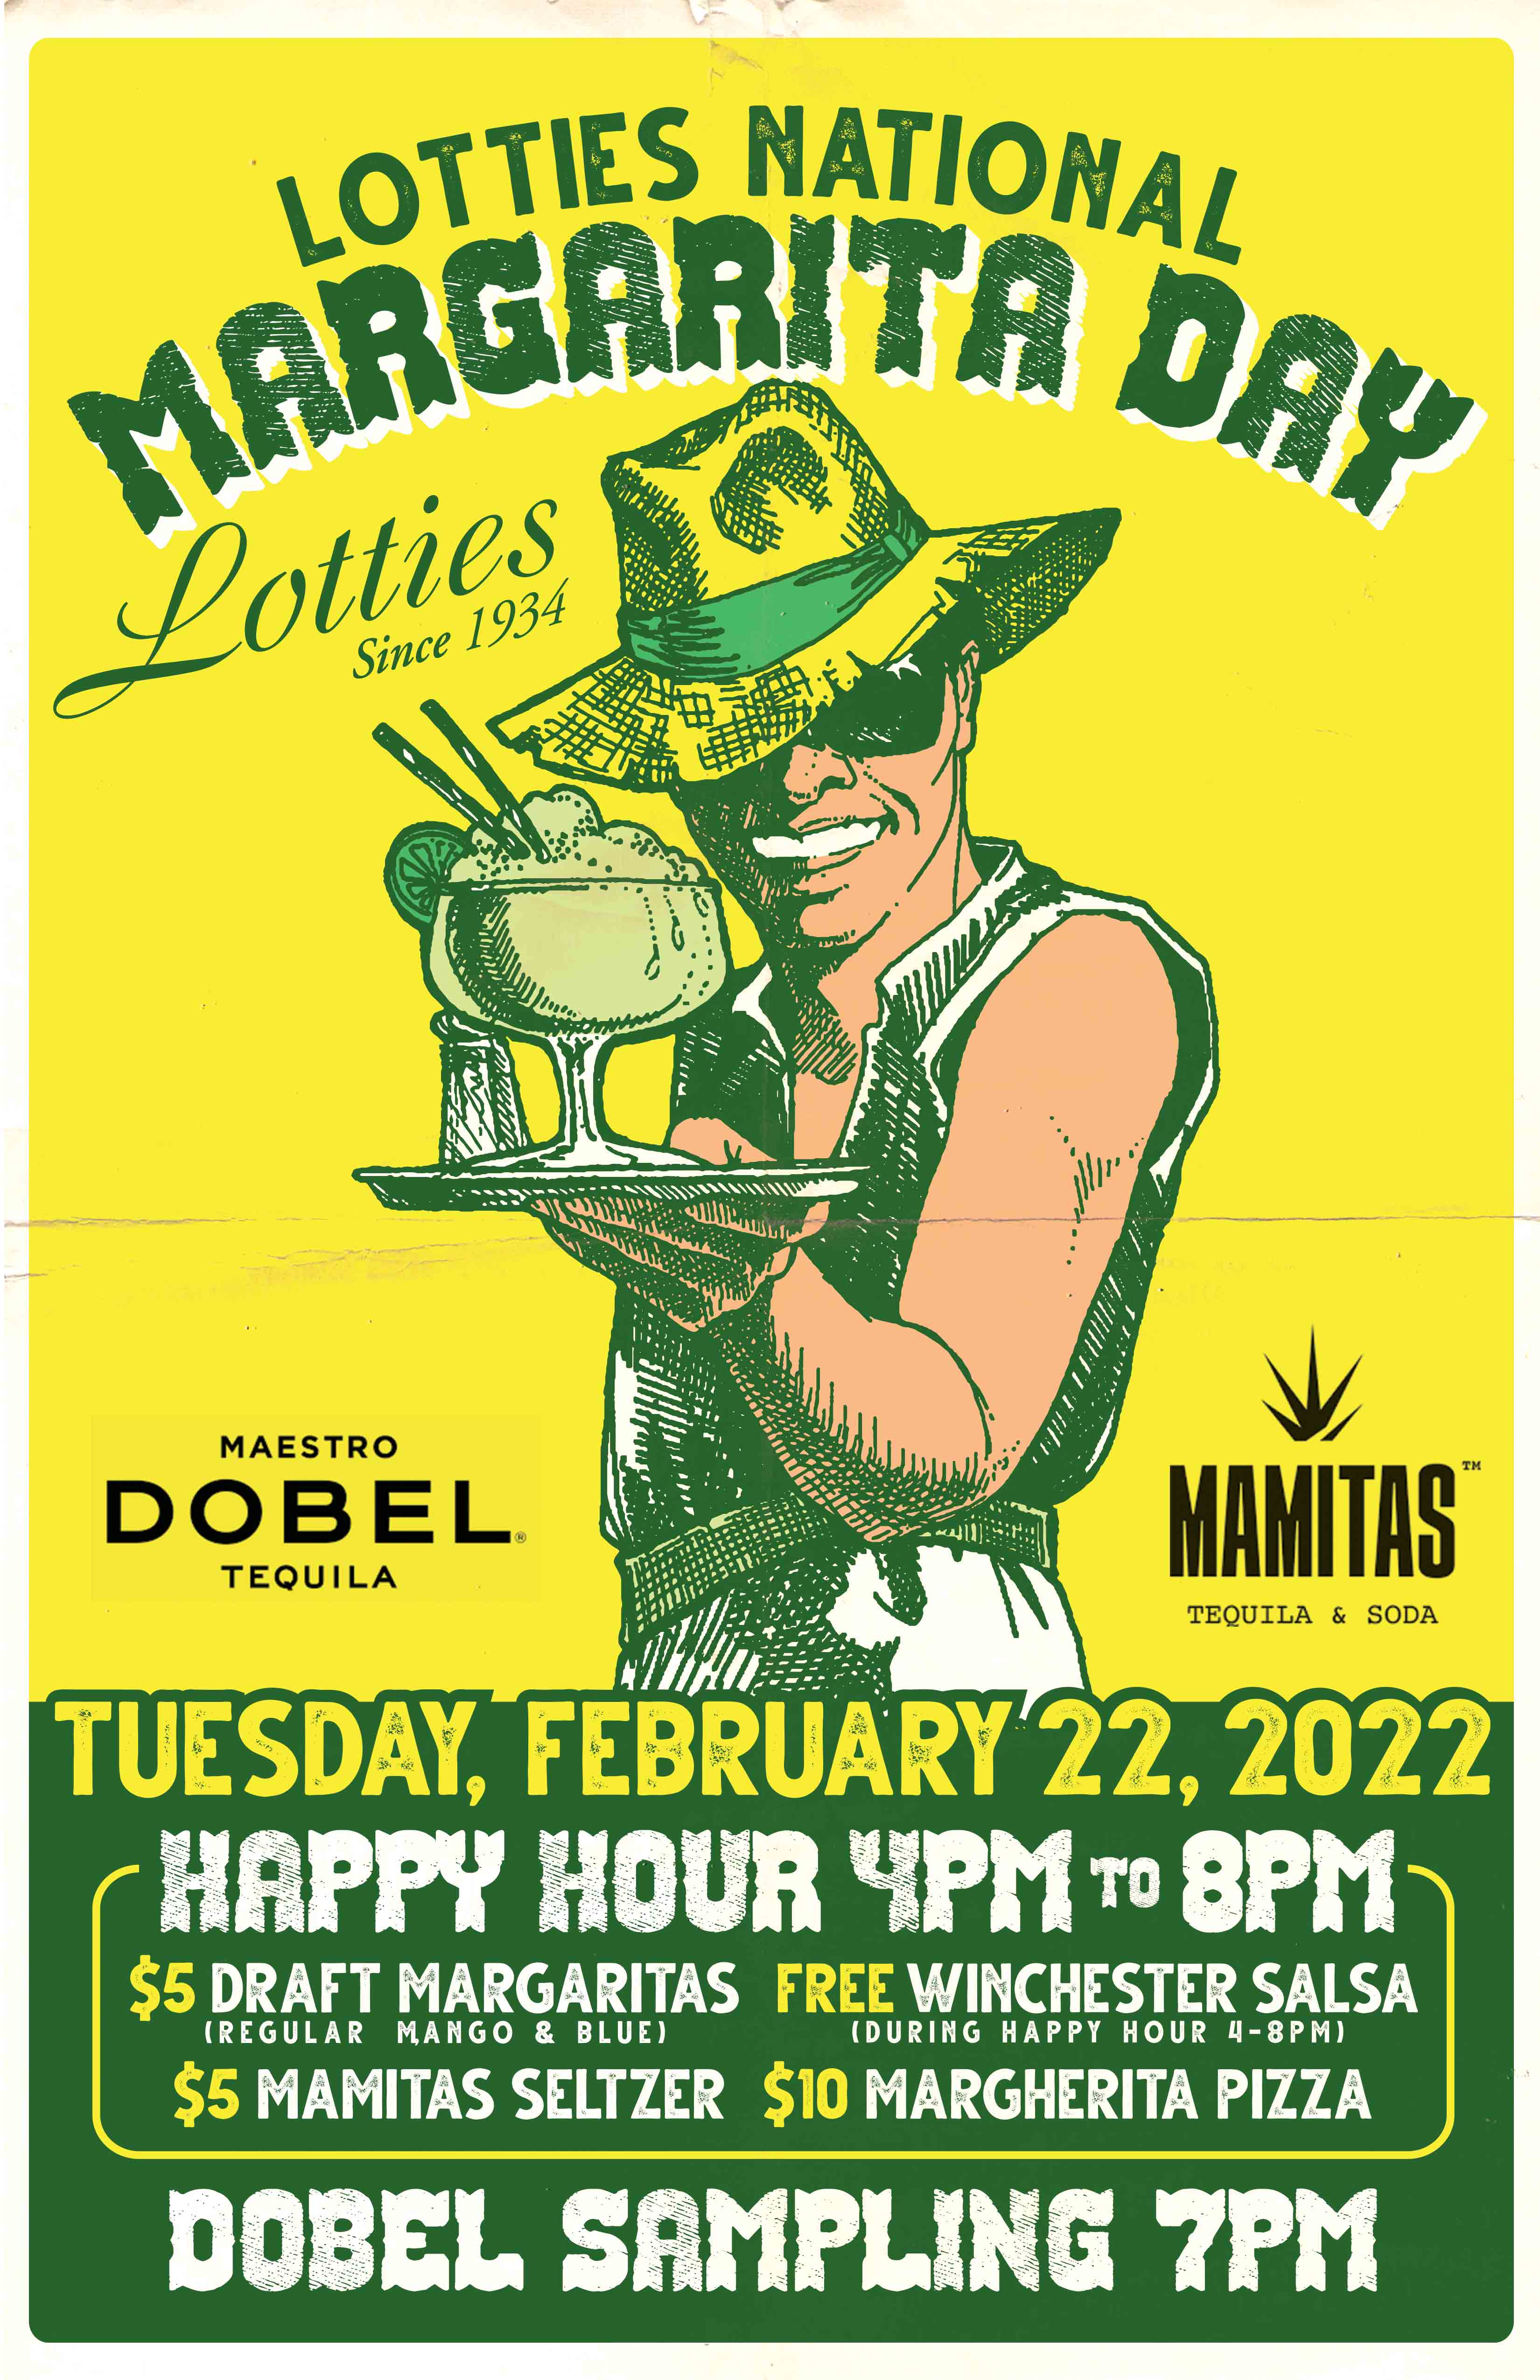 How to Imbibe the Chicago Way on National Margarita Day, February 22nd